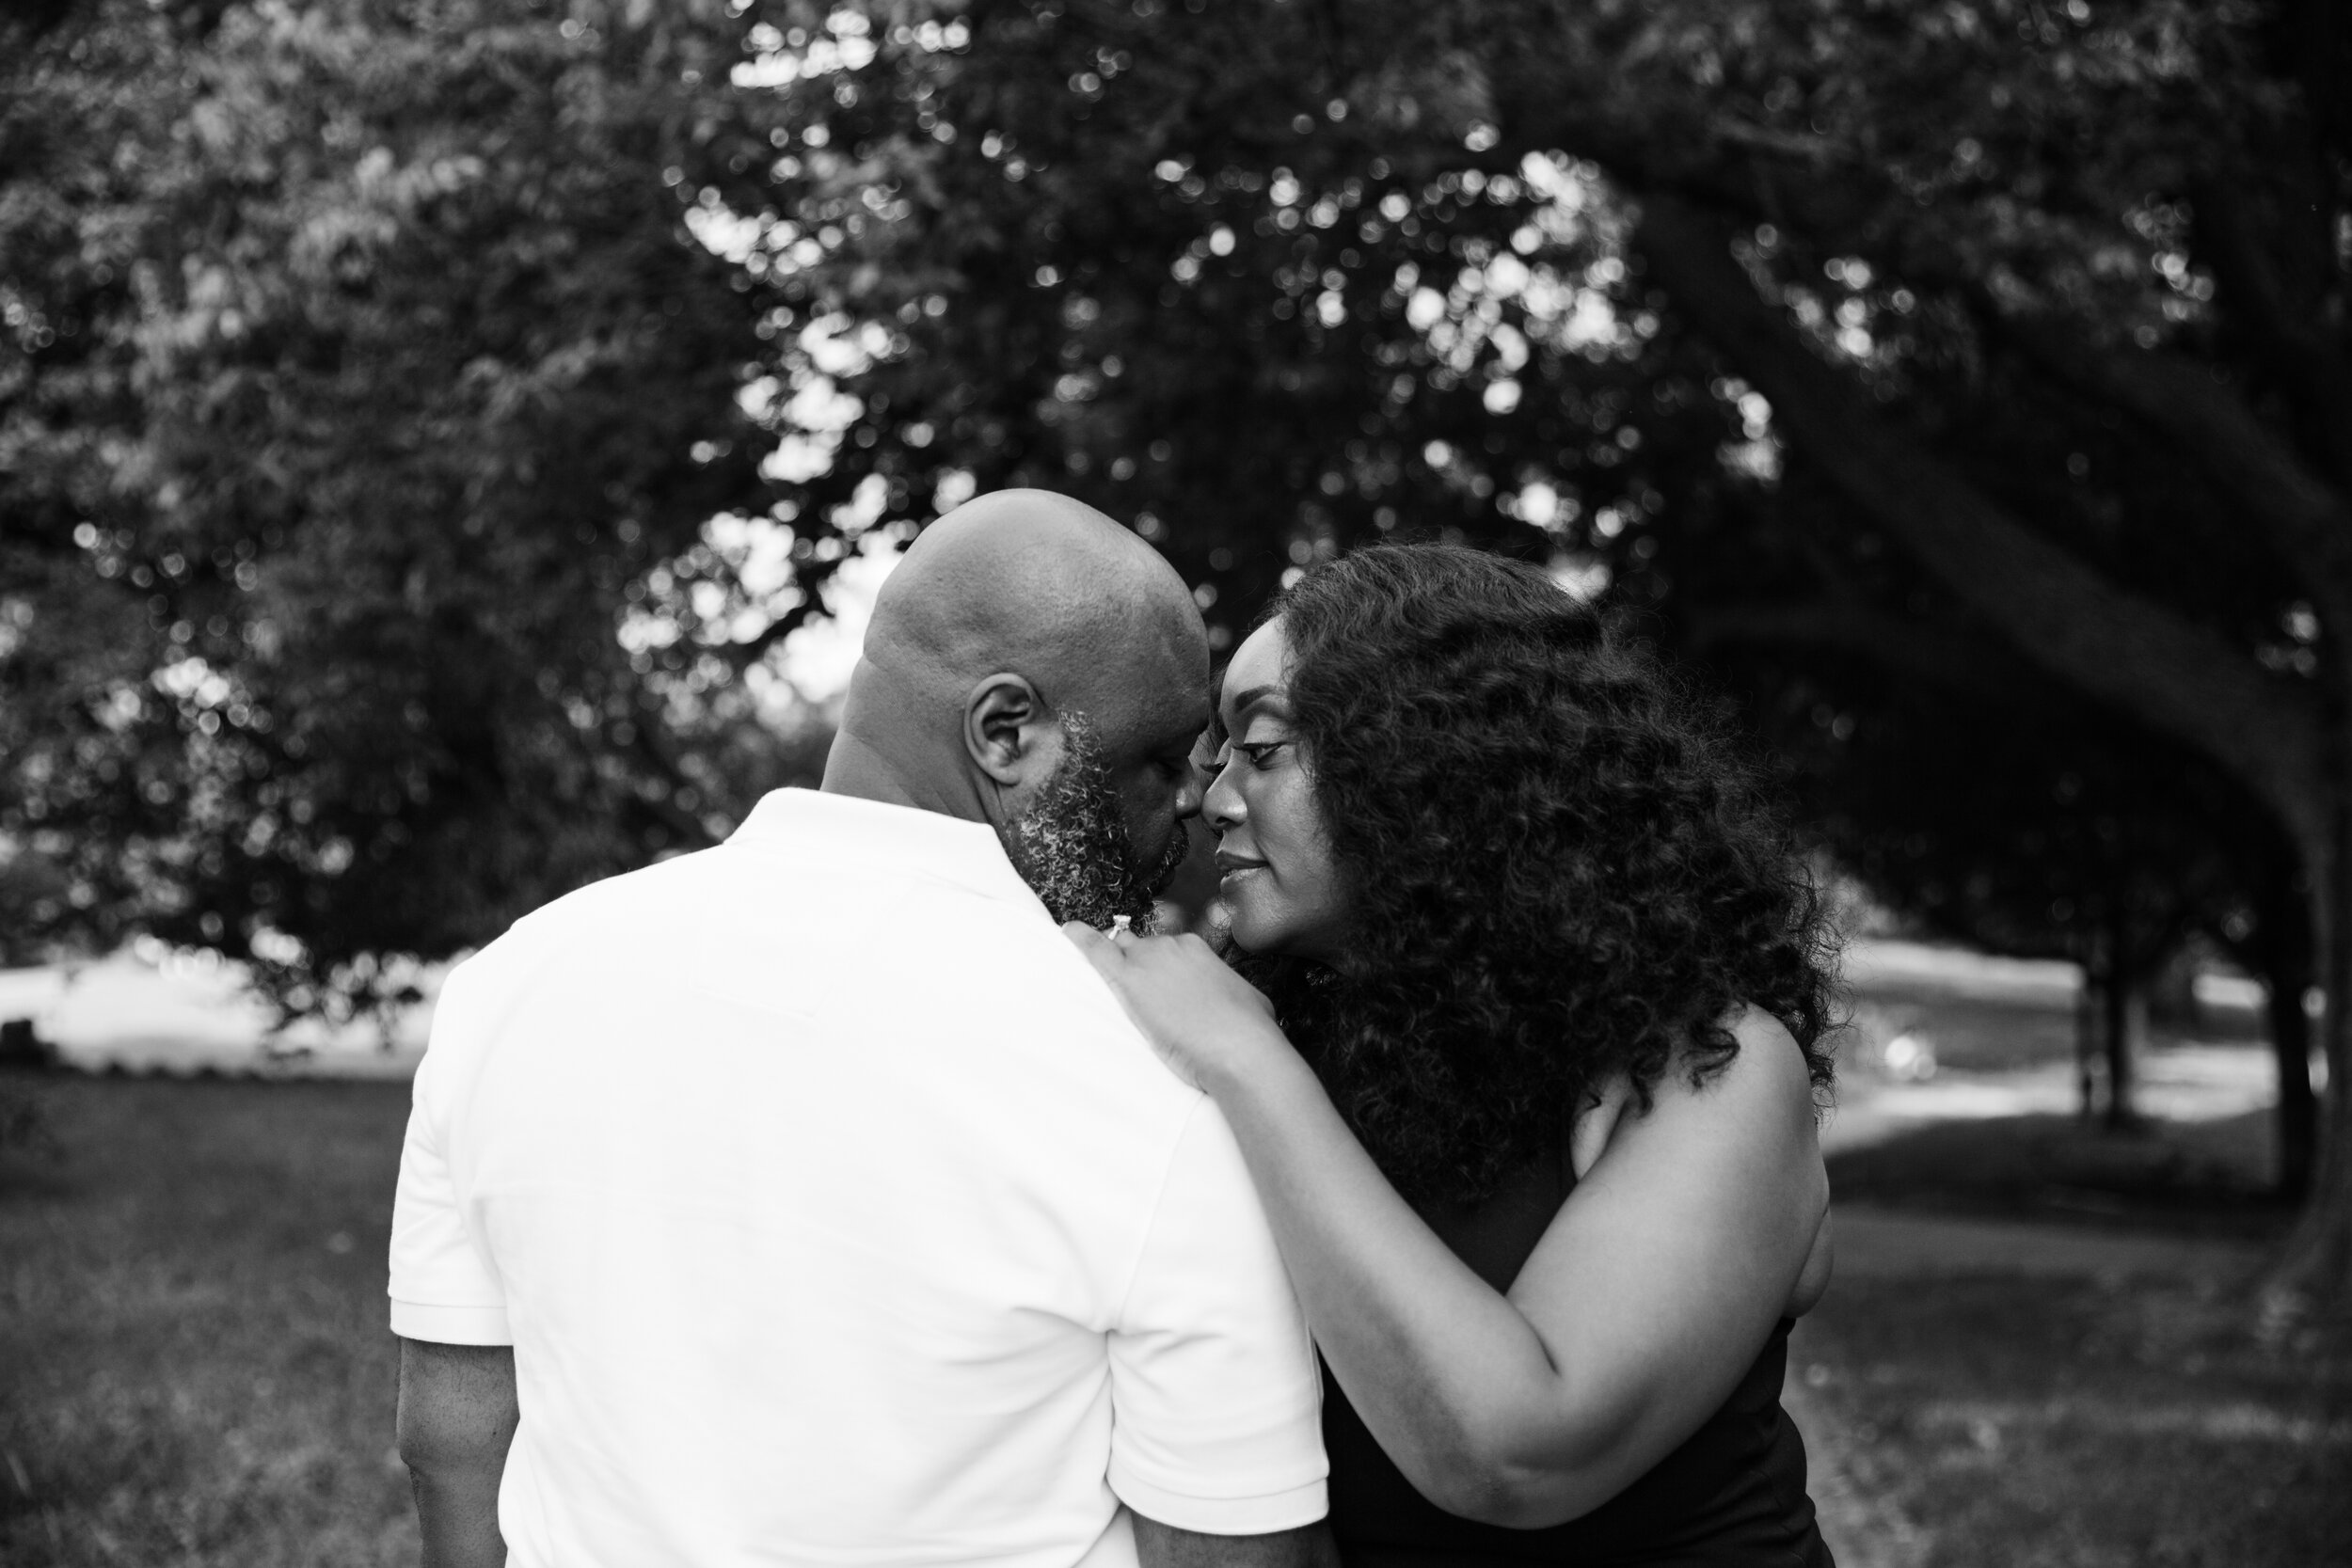 Patterson Park Engagement Session with Black Photographers Megapixels media in Baltimore Maryland (27 of 32).jpg